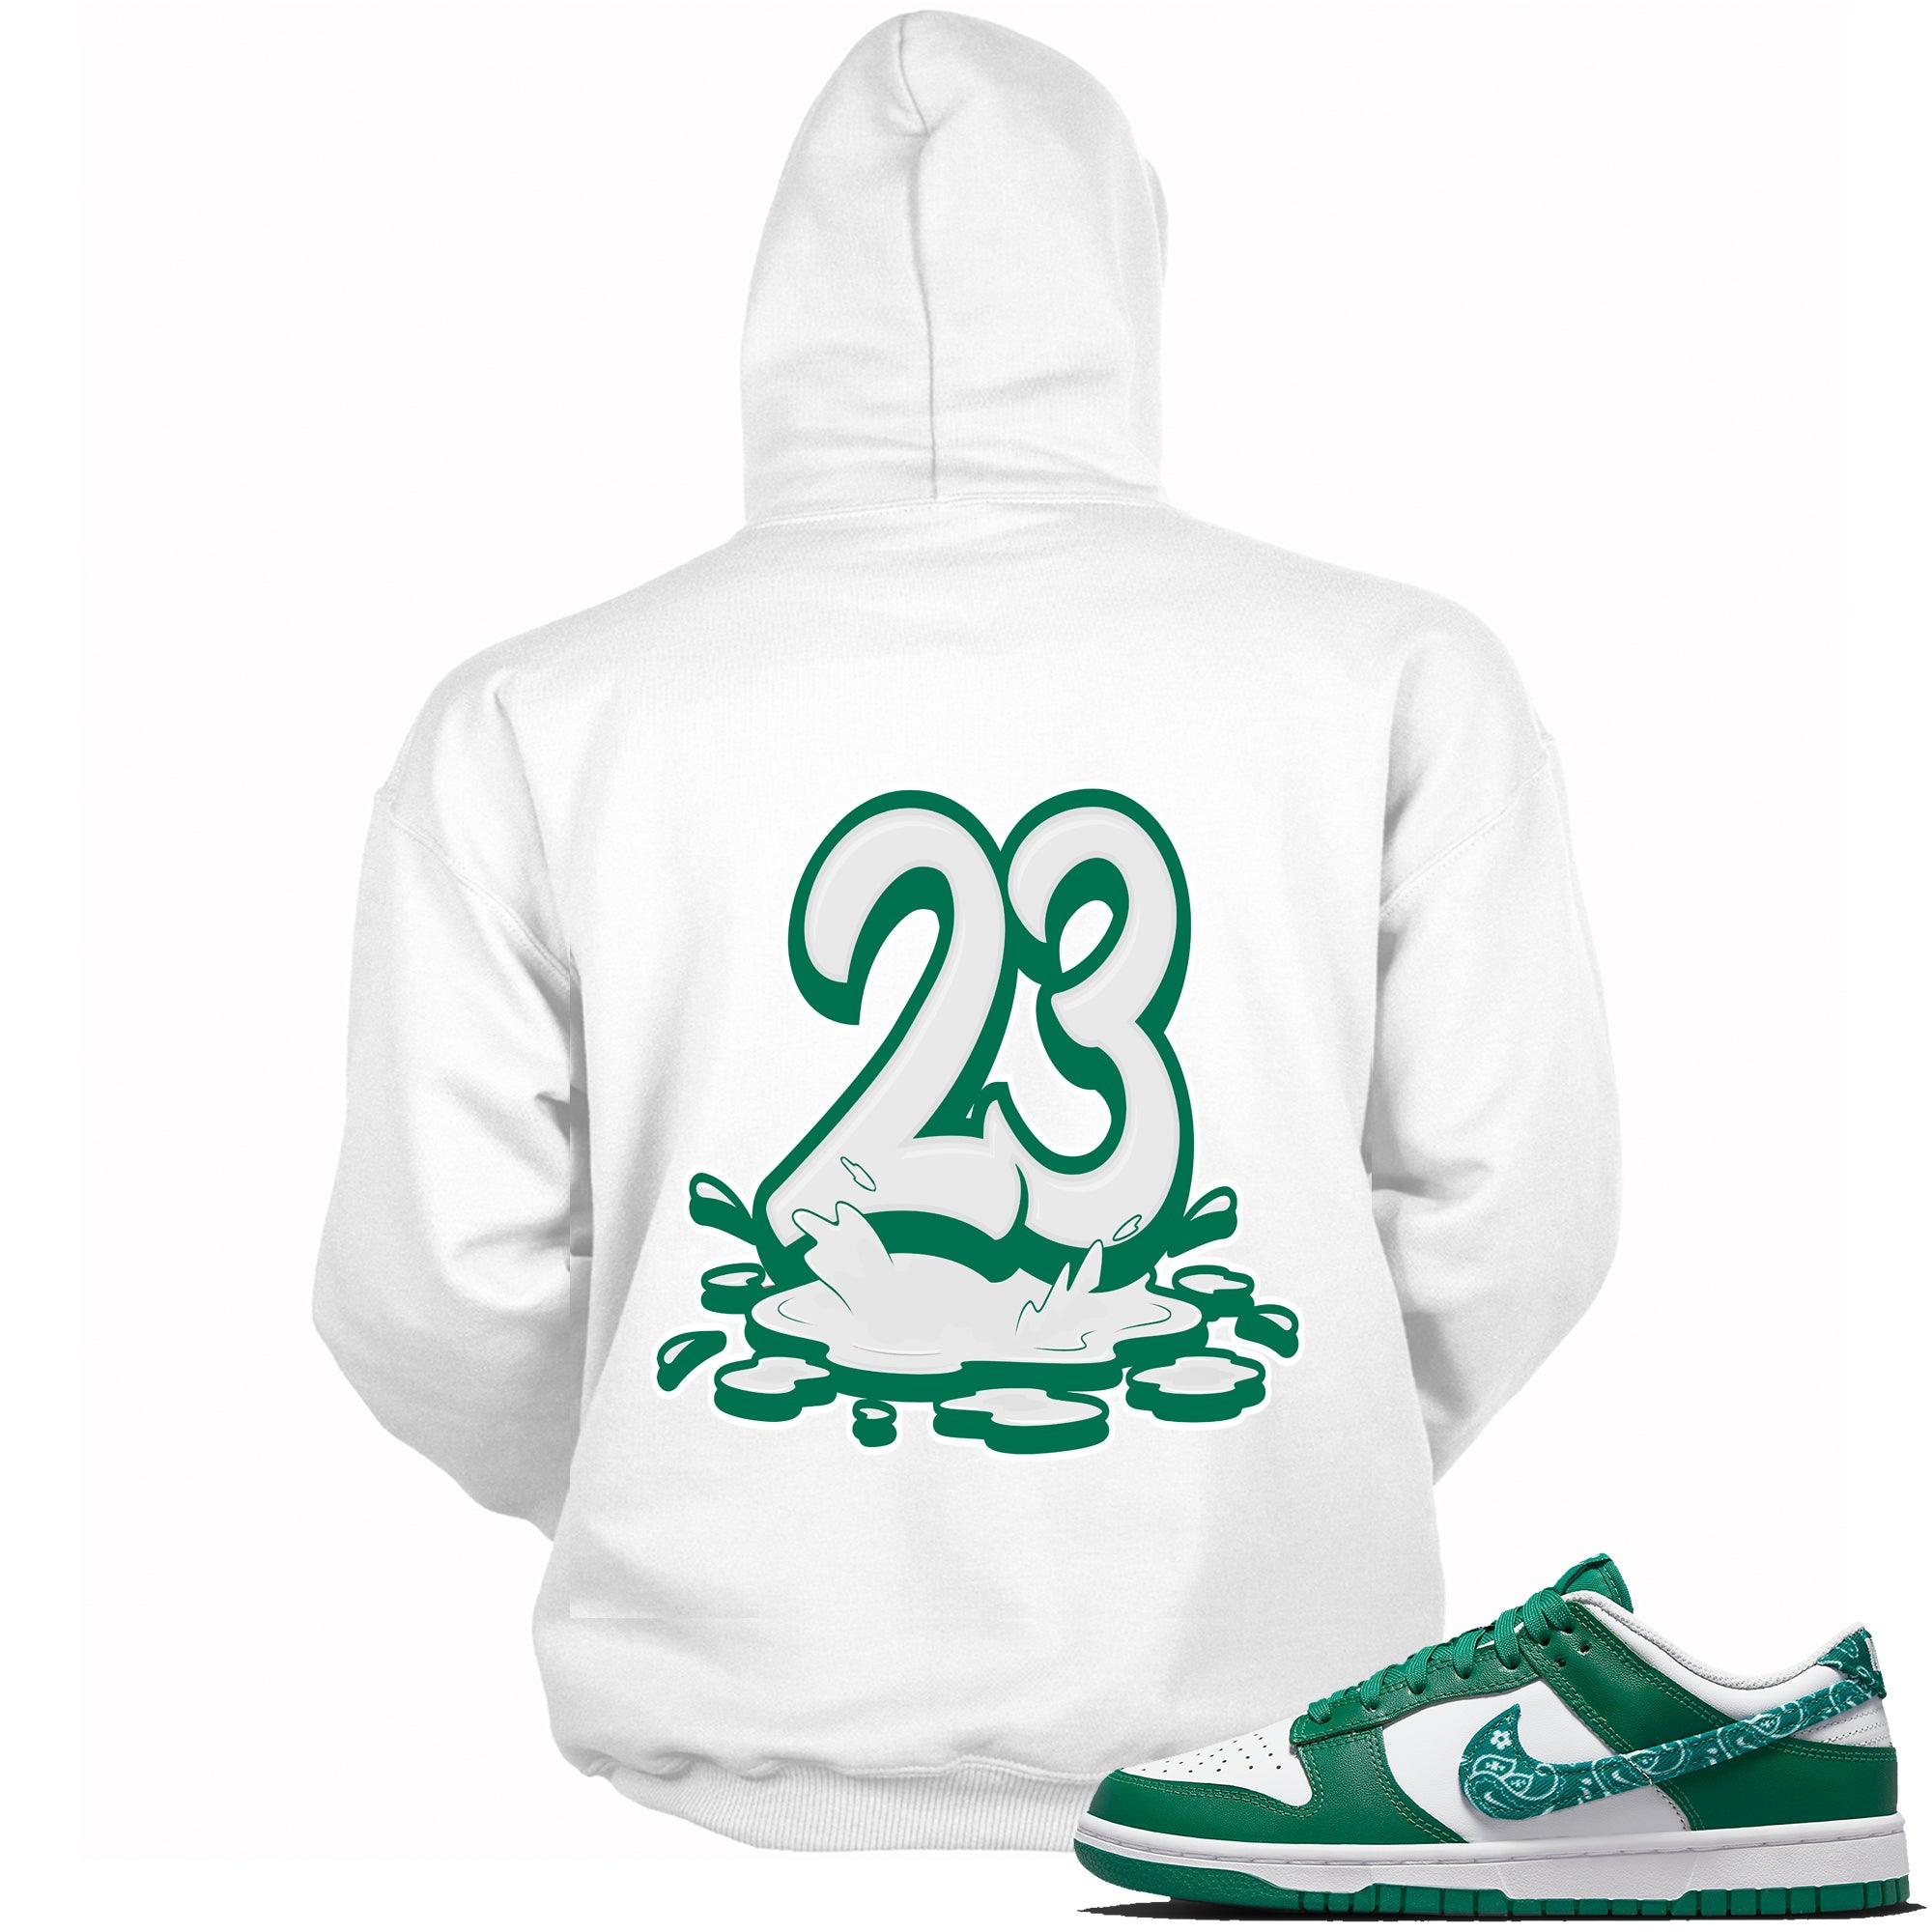 Number 23 Melting Hoodie Nike Dunk Low Essential Paisley Pack Green photo